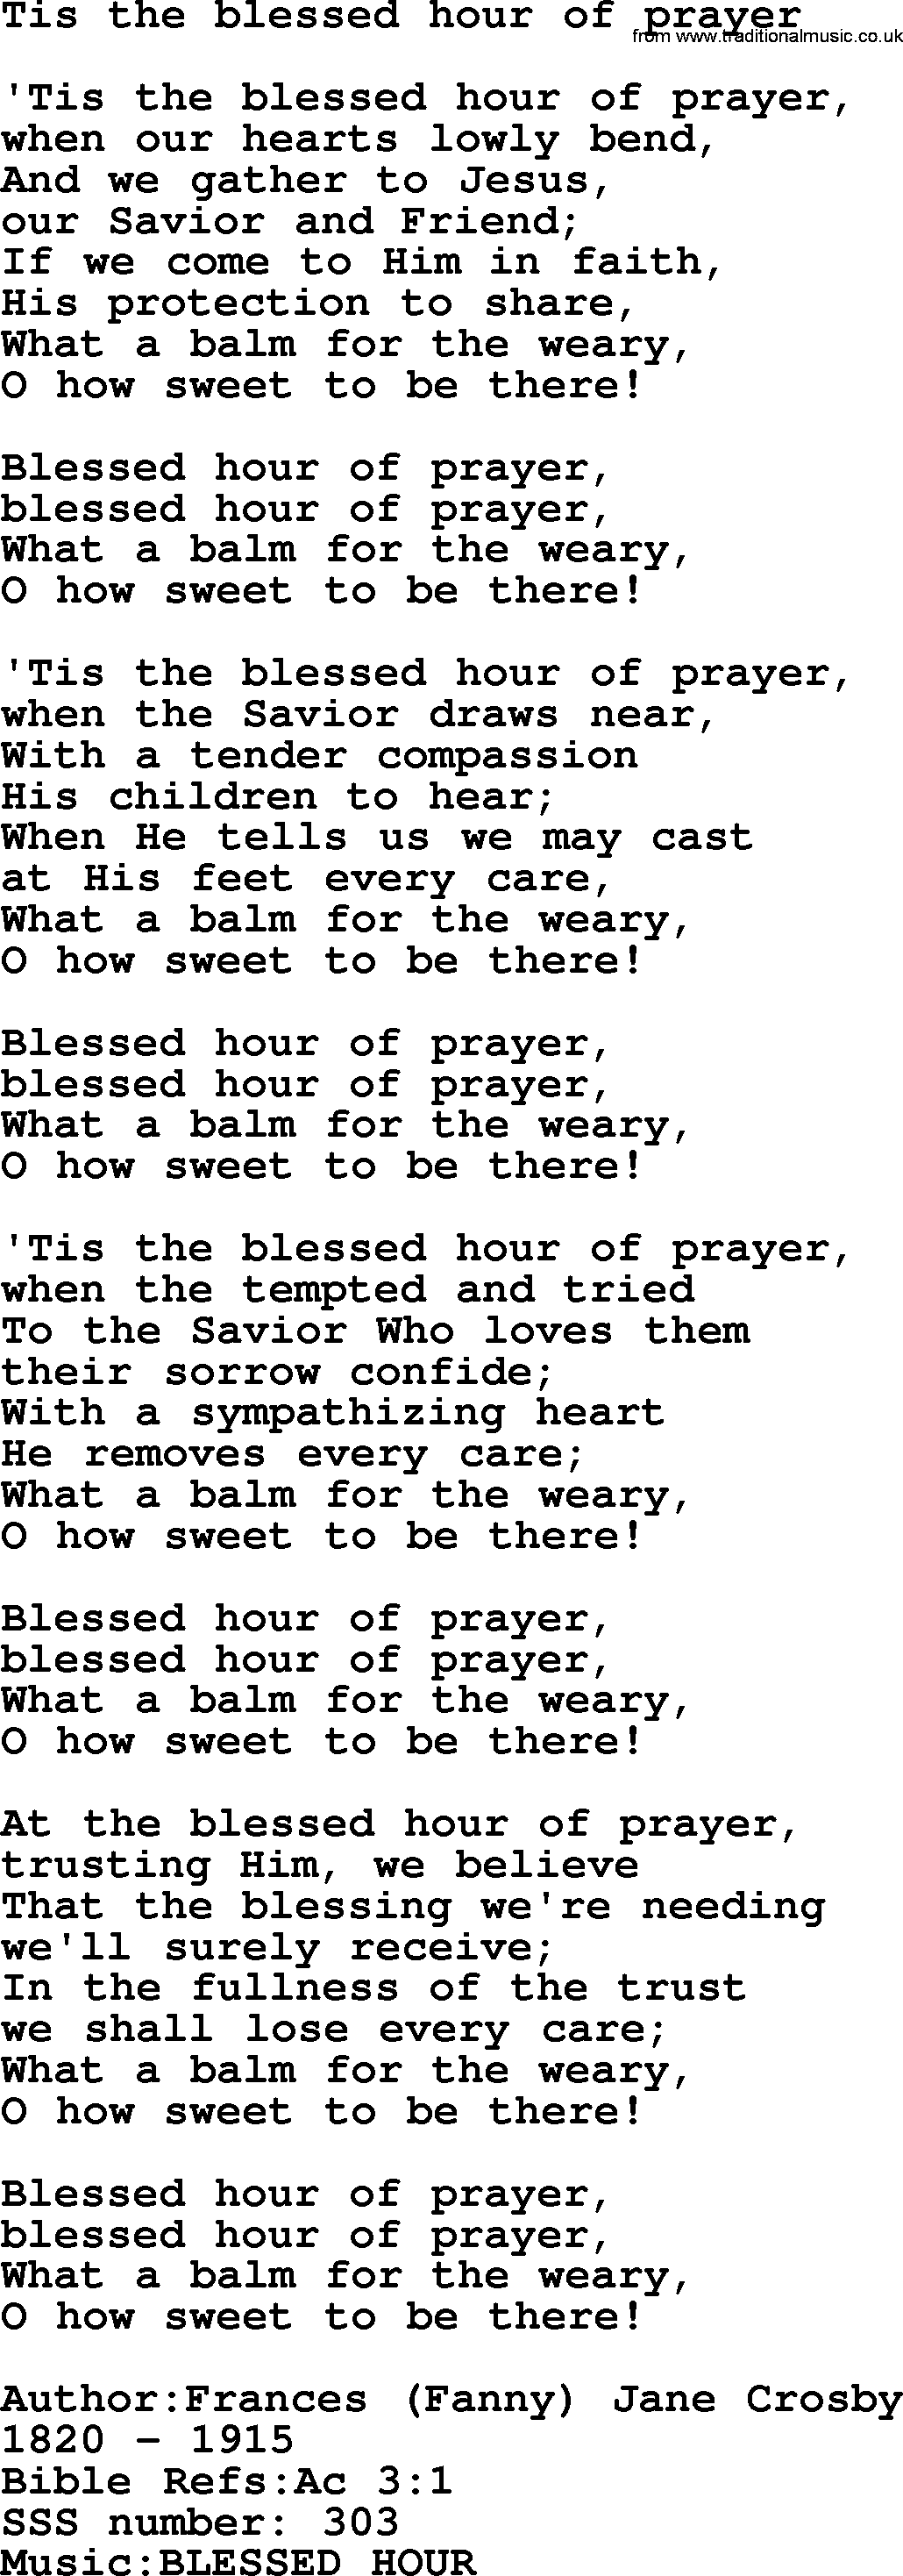 Sacred Songs and Solos complete, 1200 Hymns, title: Tis The Blessed Hour Of Prayer, lyrics and PDF